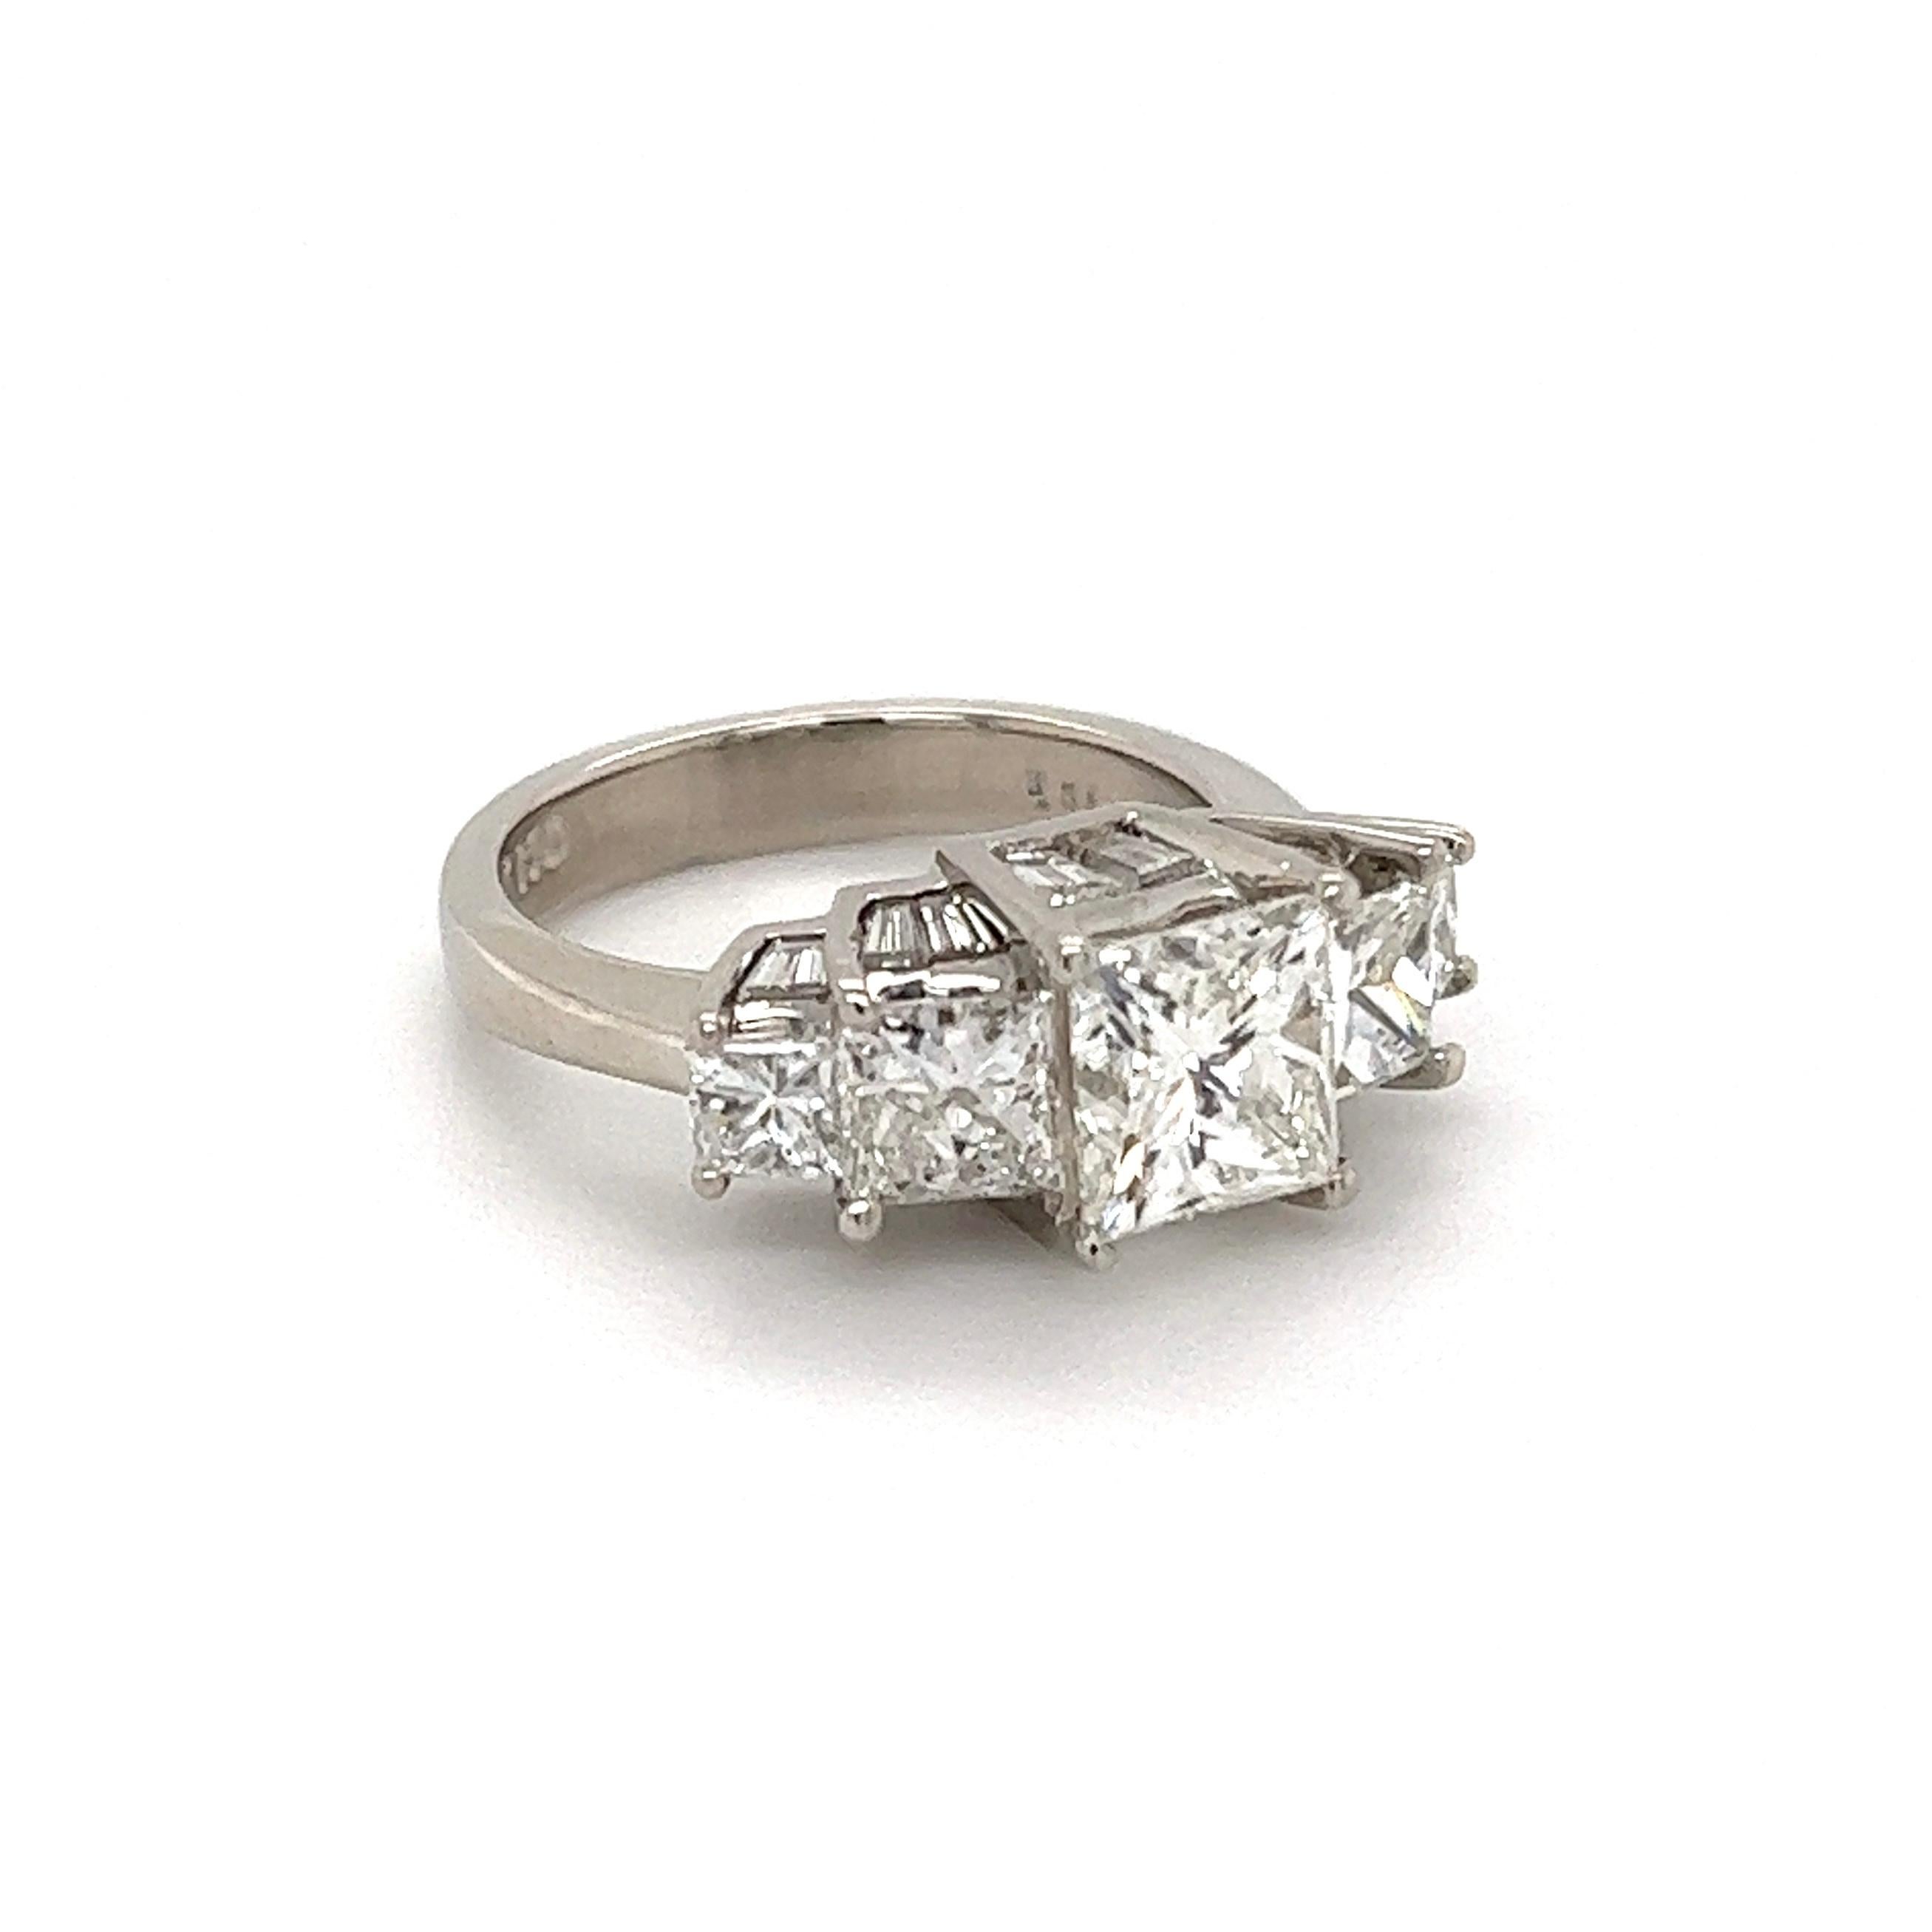 Simply Beautiful! Finely crafted Five Stone Princess-cut Quad Diamond Ring. Centering an amazing Hand set securely nestled Princess-cut Diamond weighing approx. 1.52 Carat with 2 quad cut Princess cut diamonds Diamond on either side, weighing